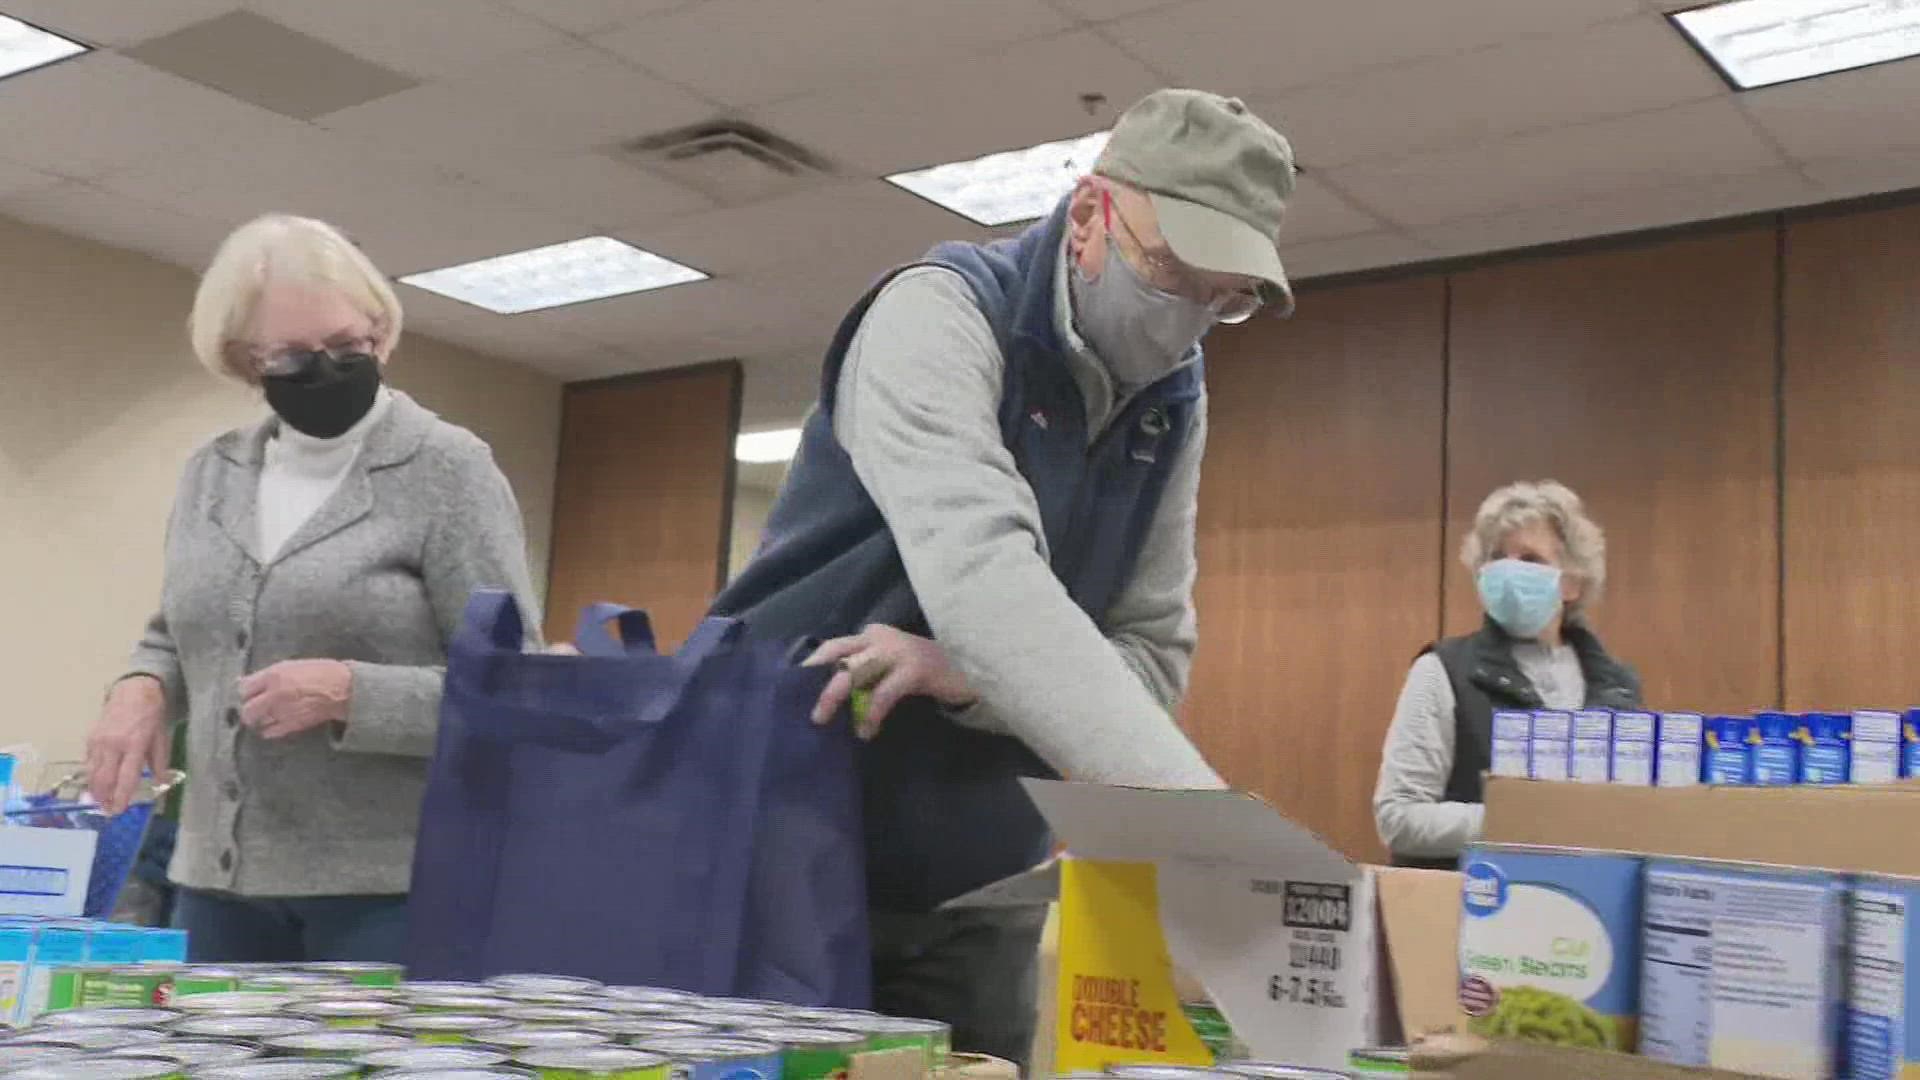 The Muskegon Rescue Mission is doing its part to spread kindness and show support for community members this Thanksgiving.